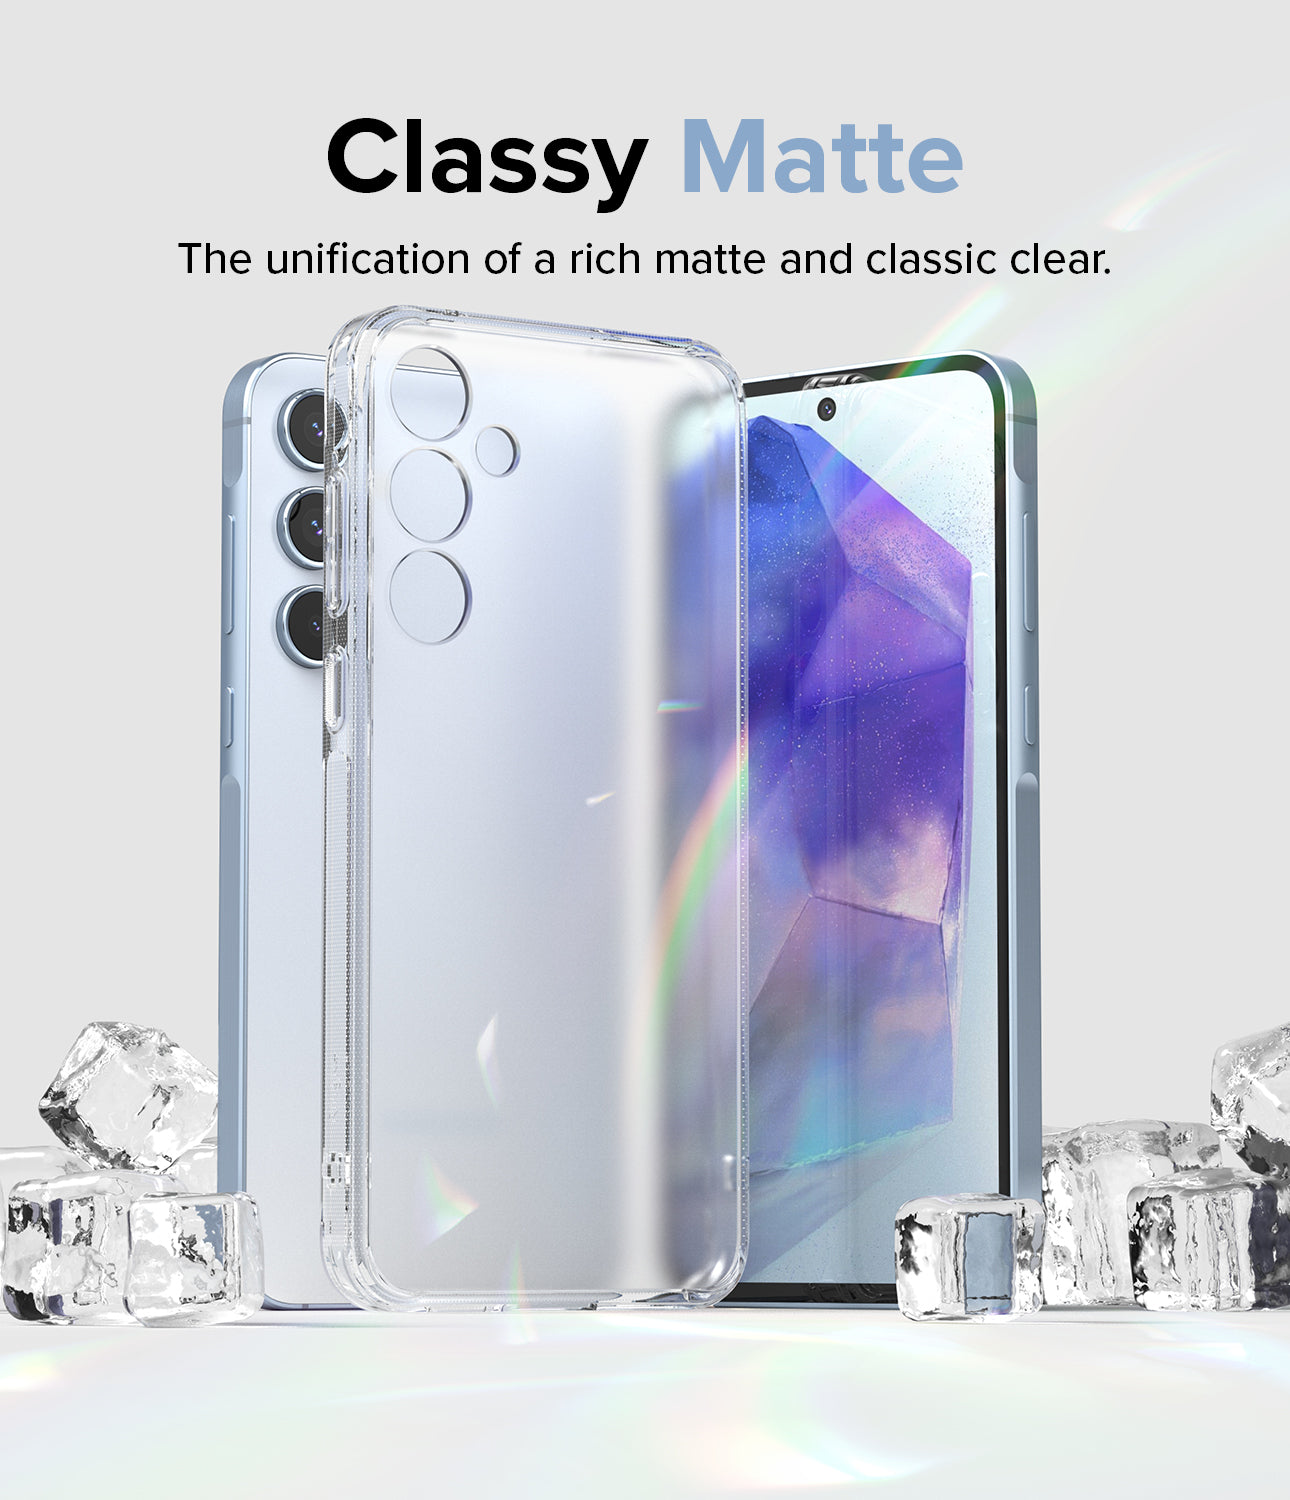 Galaxy A55 Case | Fusion Matte - Classy Matte. The unification of a rich matte and classic clear.